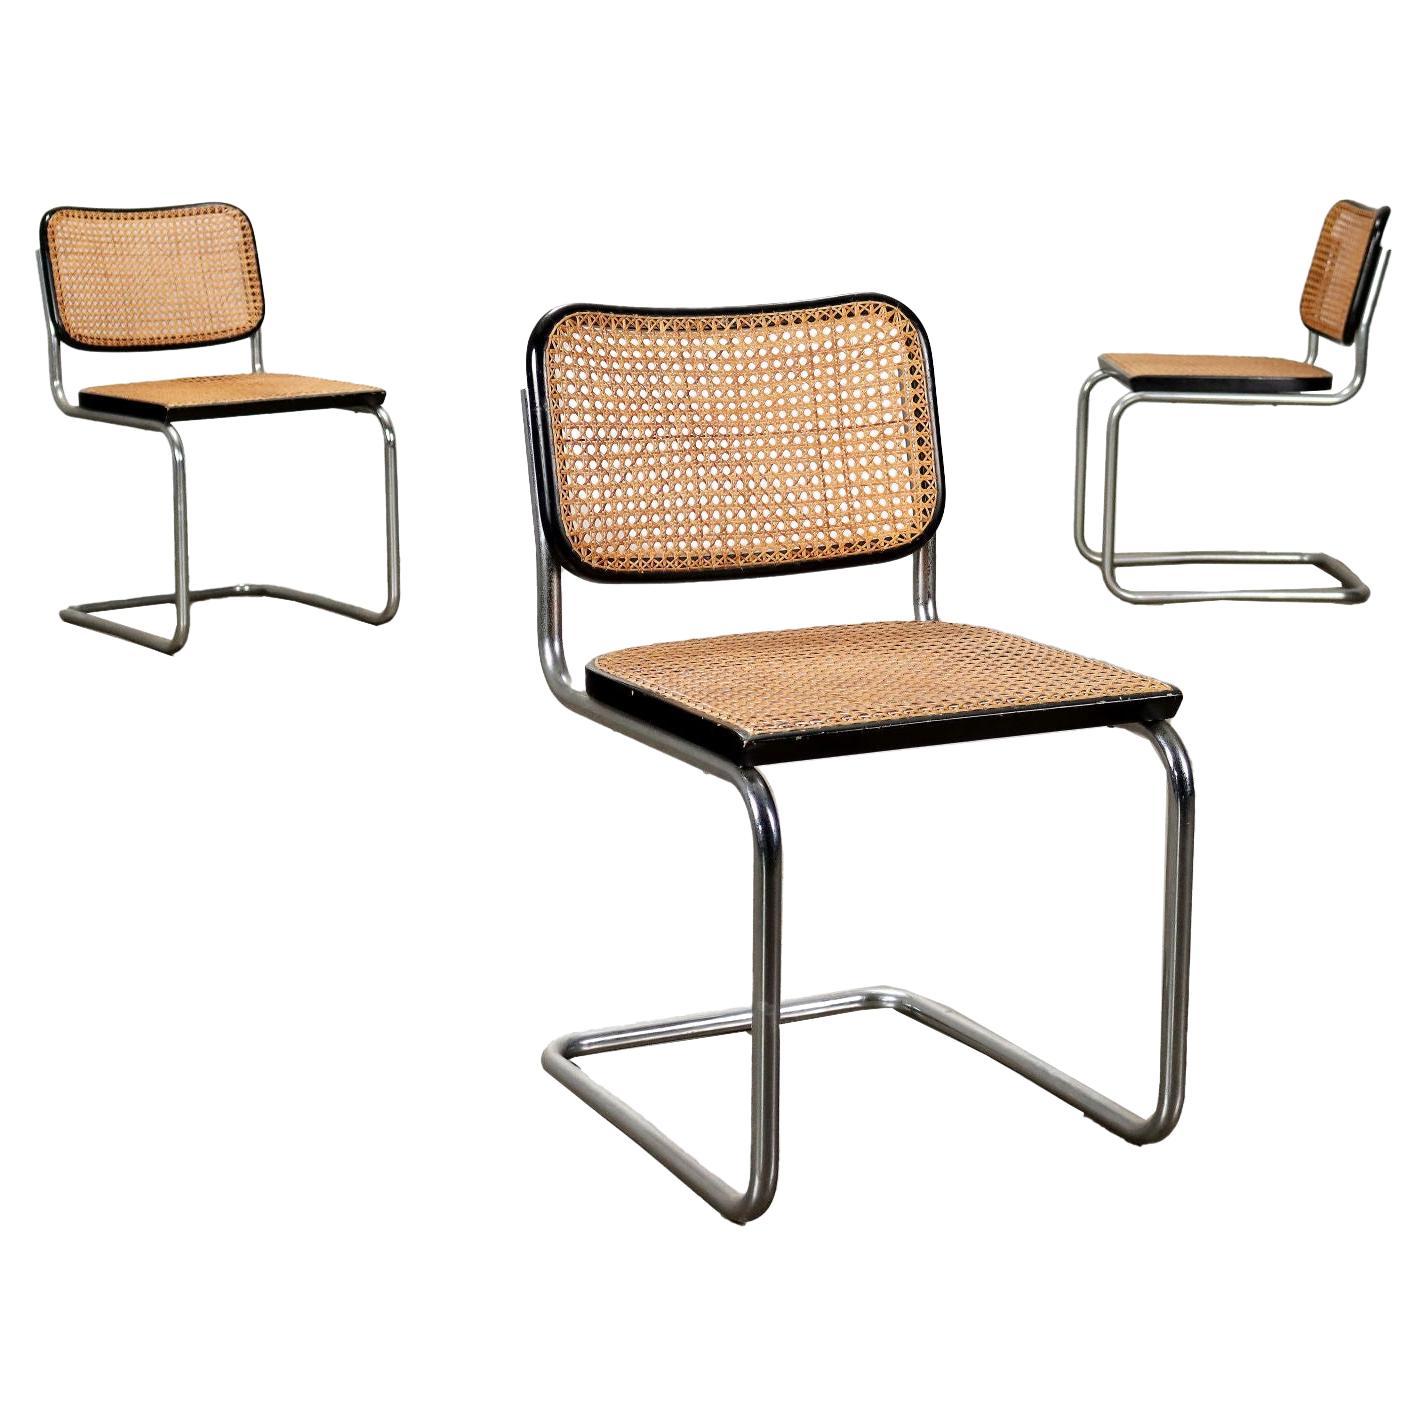 Group of 3 Chairs Gavina Cesca Wood, Italy, 1960s